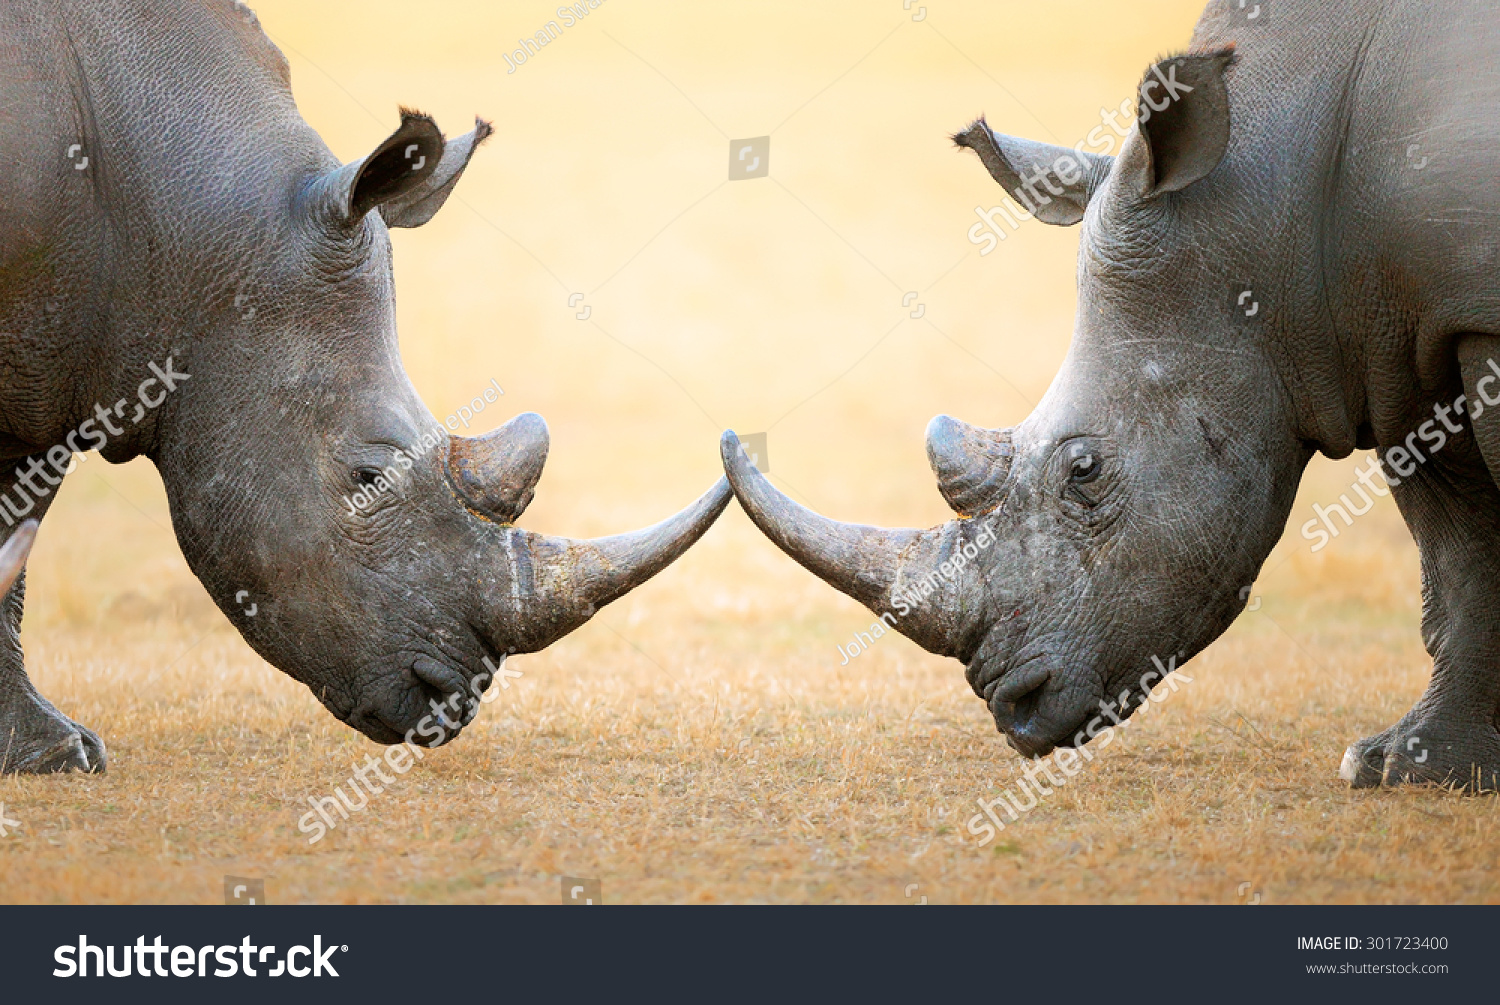 White Rhinoceros (Ceratotherium Simum) head to head - Kruger National Park (South Africa) #301723400